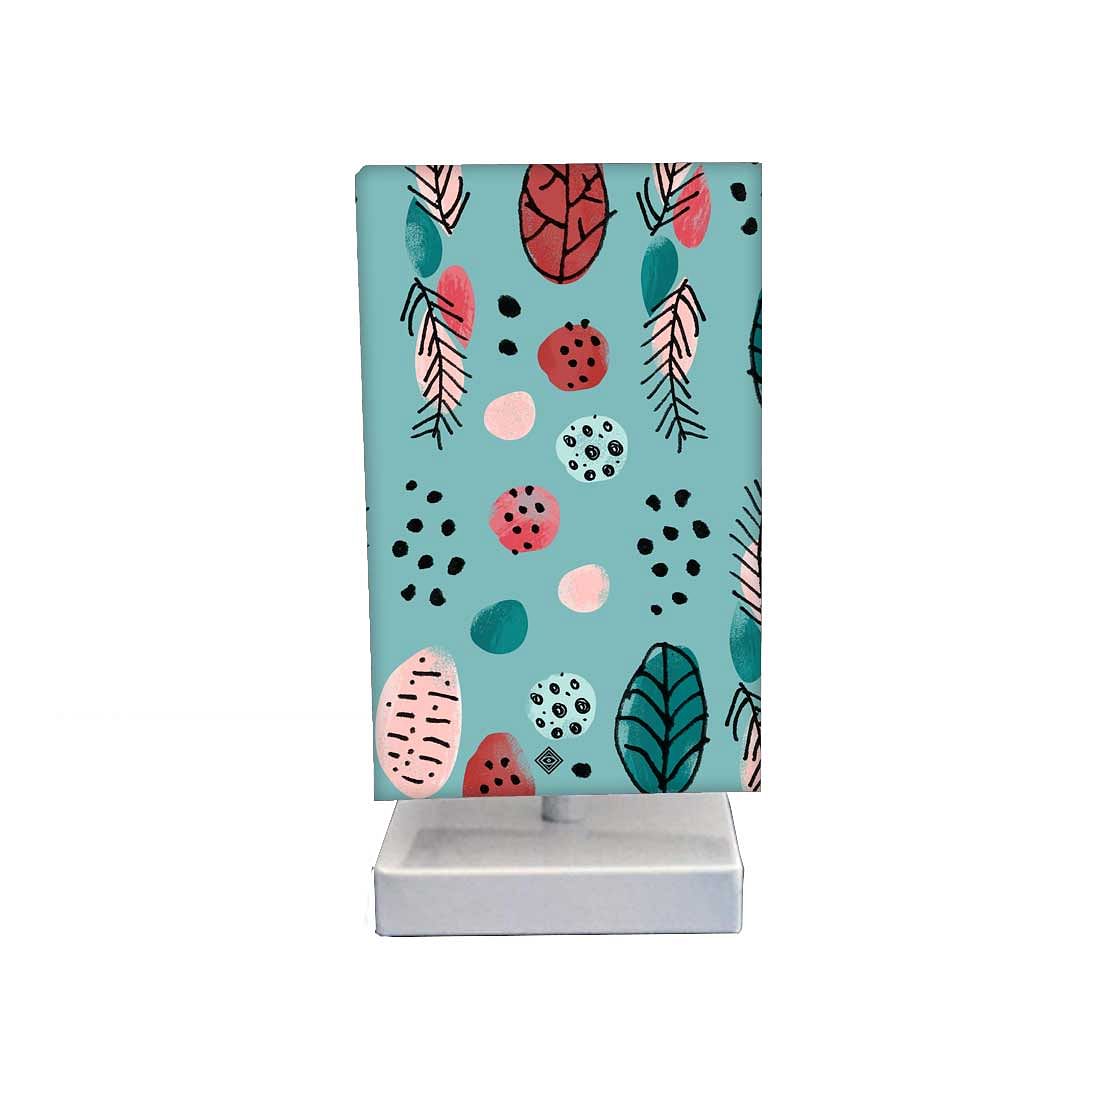 Table Lamp For Bedroom - TEAL NATURE GARDEN Nutcase